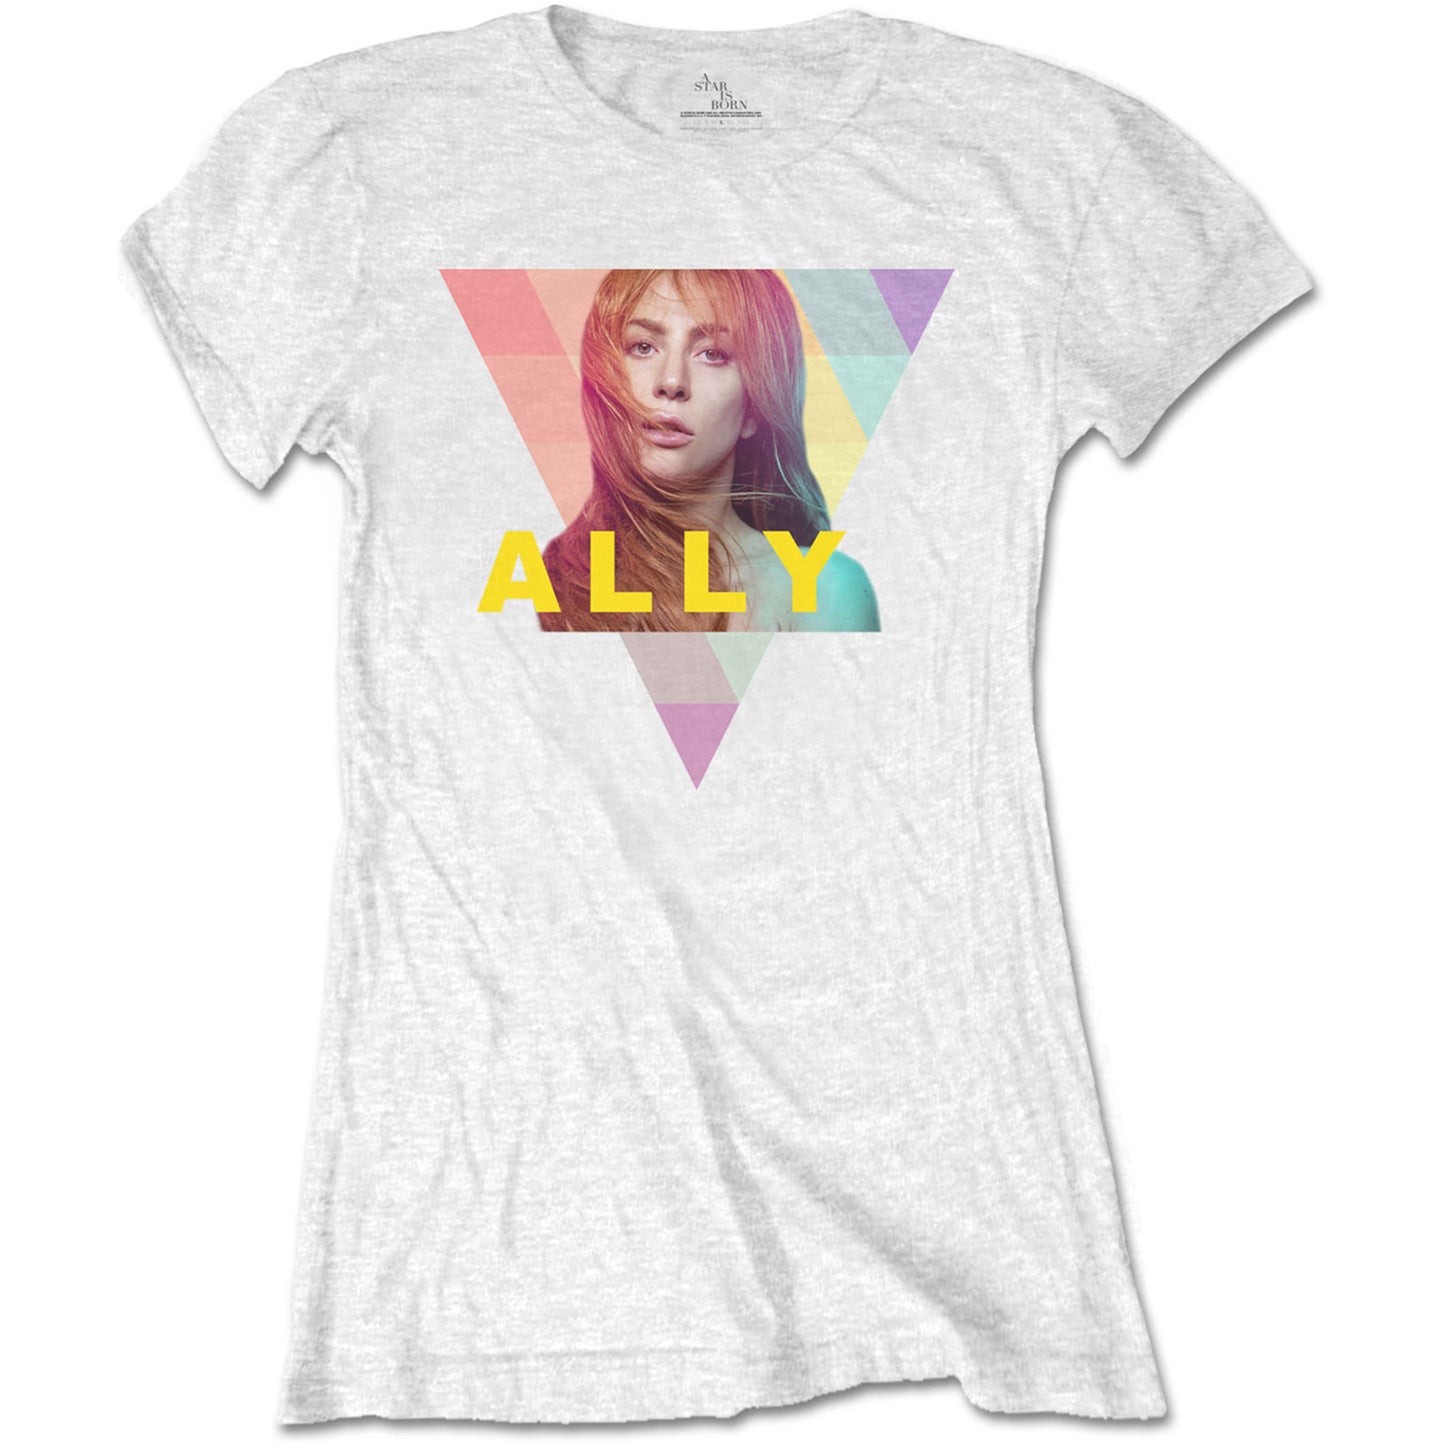 A Star Is Born Ally Geo-Triangle Ladies T-Shirt